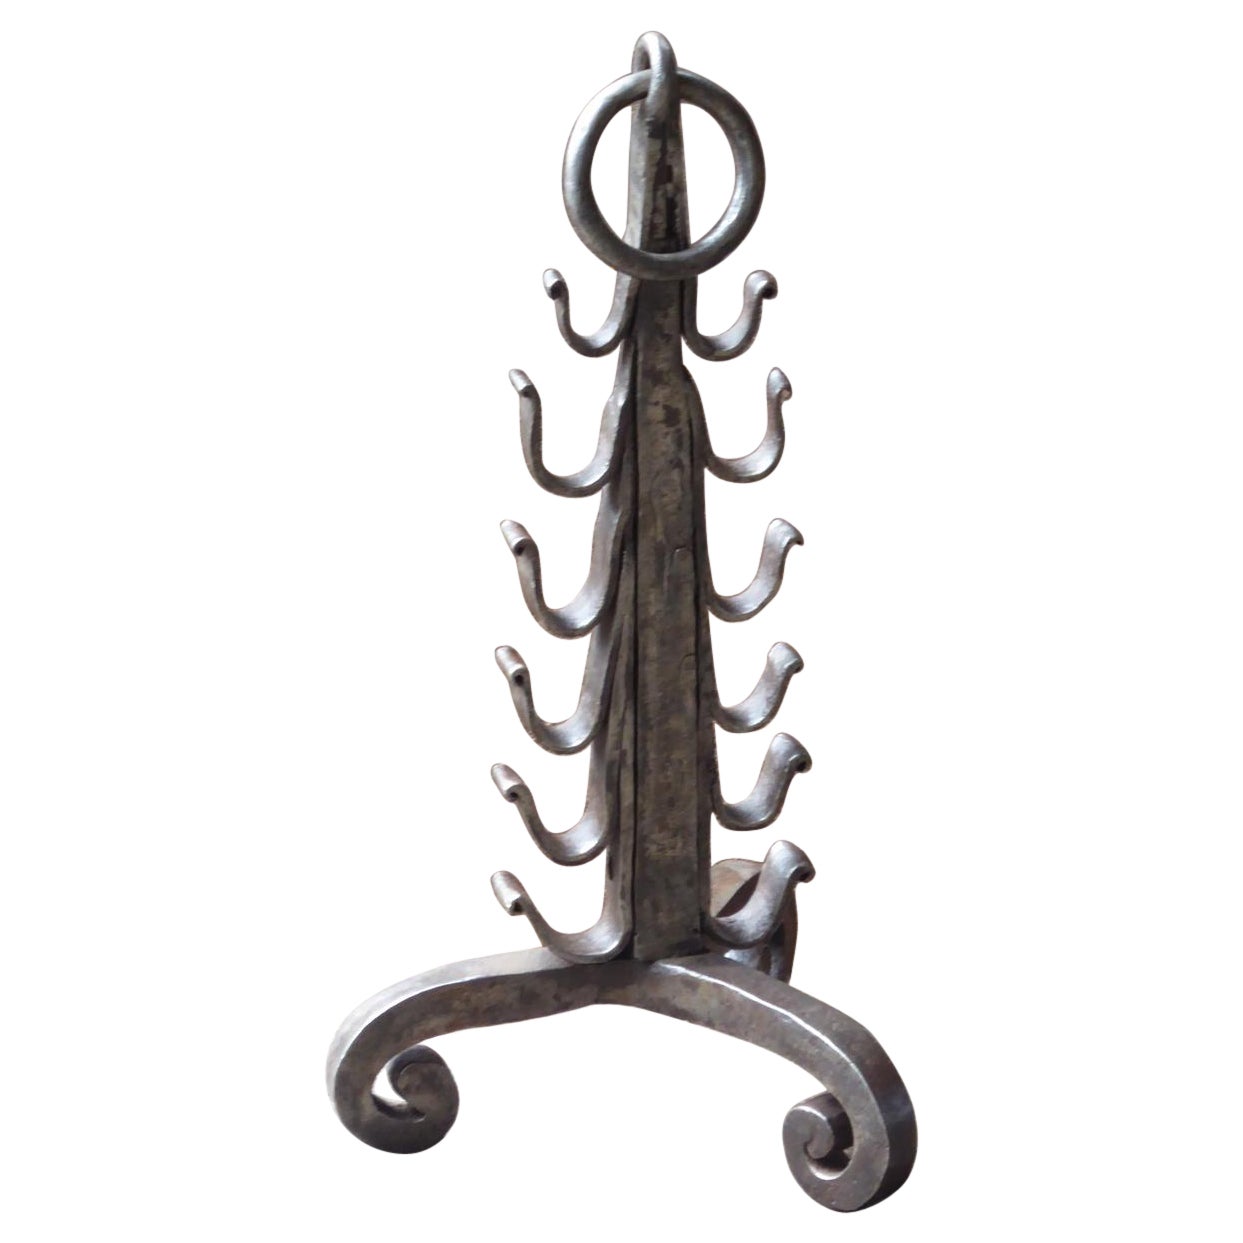 Antique French Stand for a Roasting Jack, 18th Century